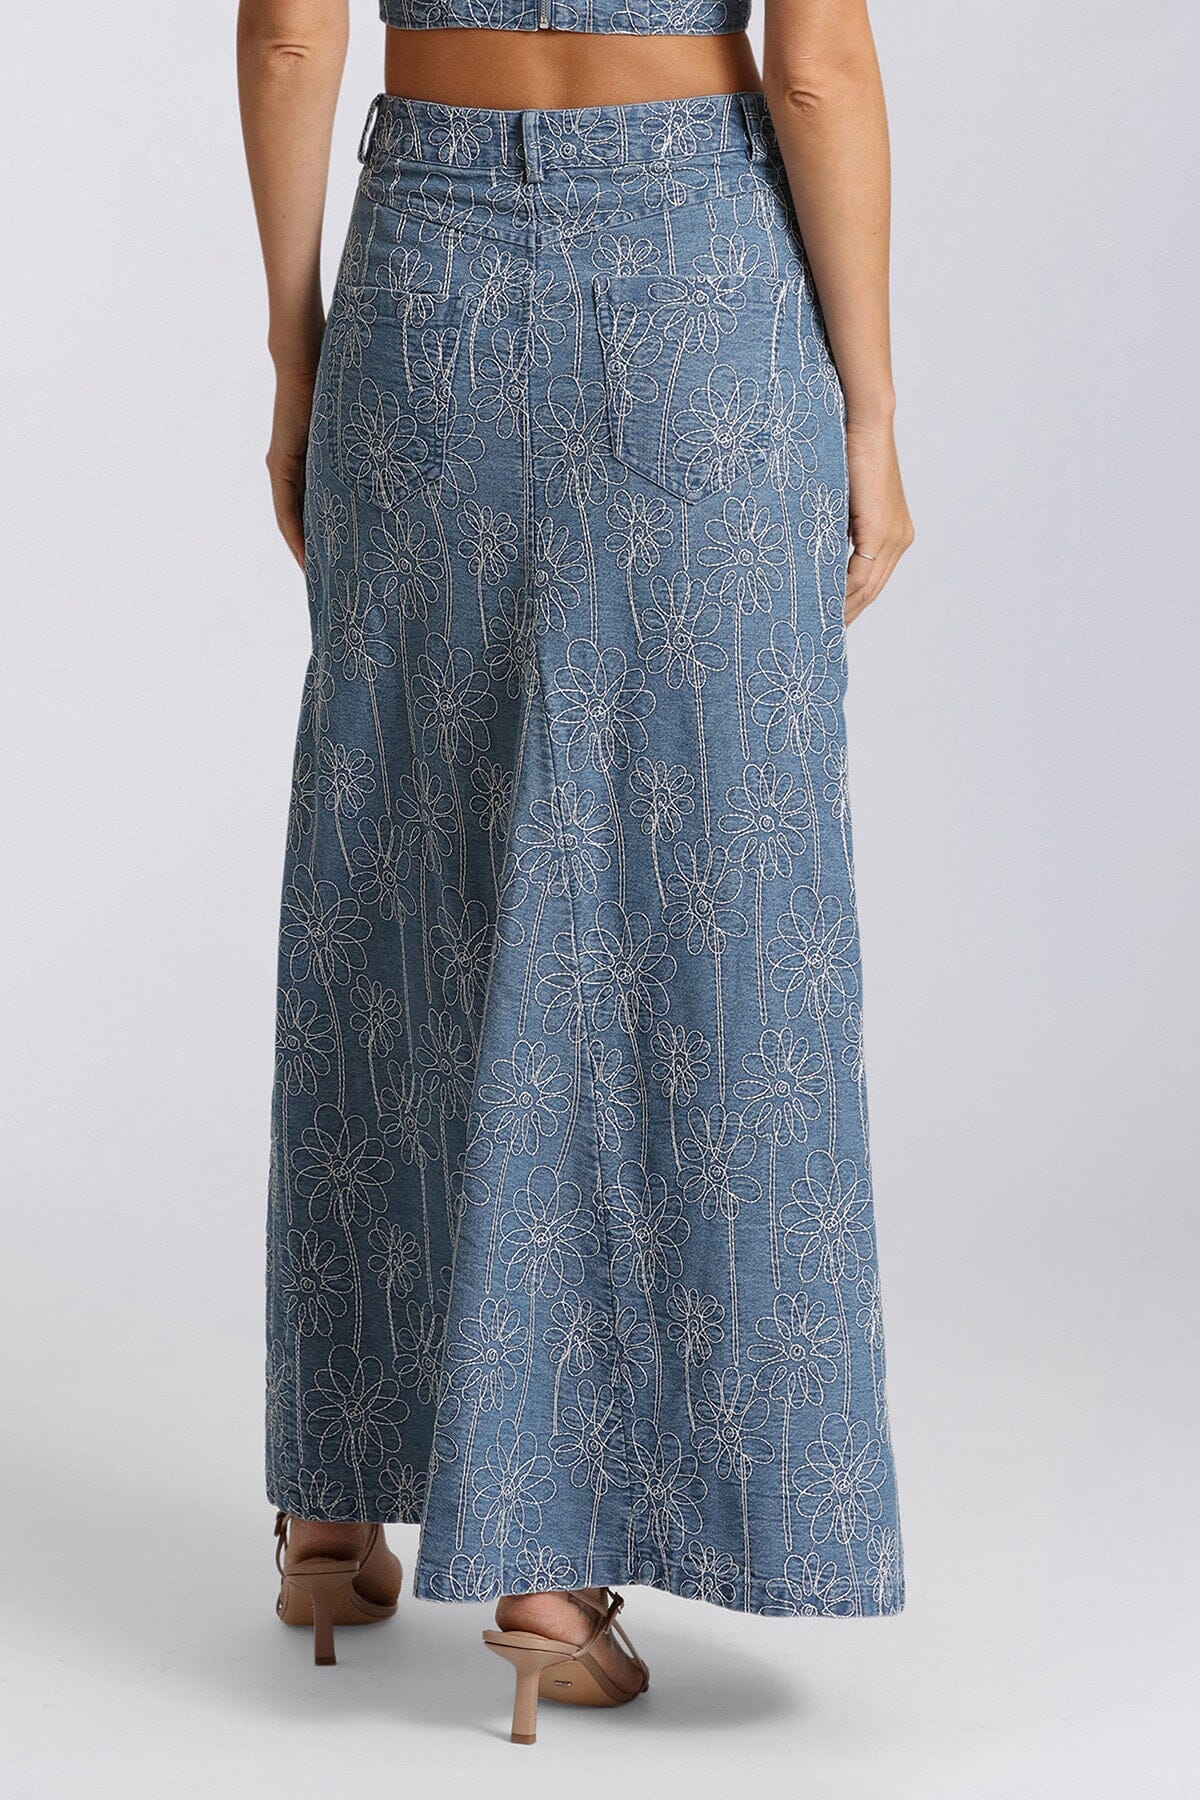 Light blue embroidered denim long maxi skirt - women's figure flattering work appropriate skirts for 2024 fashion trends by Avec Les Filles